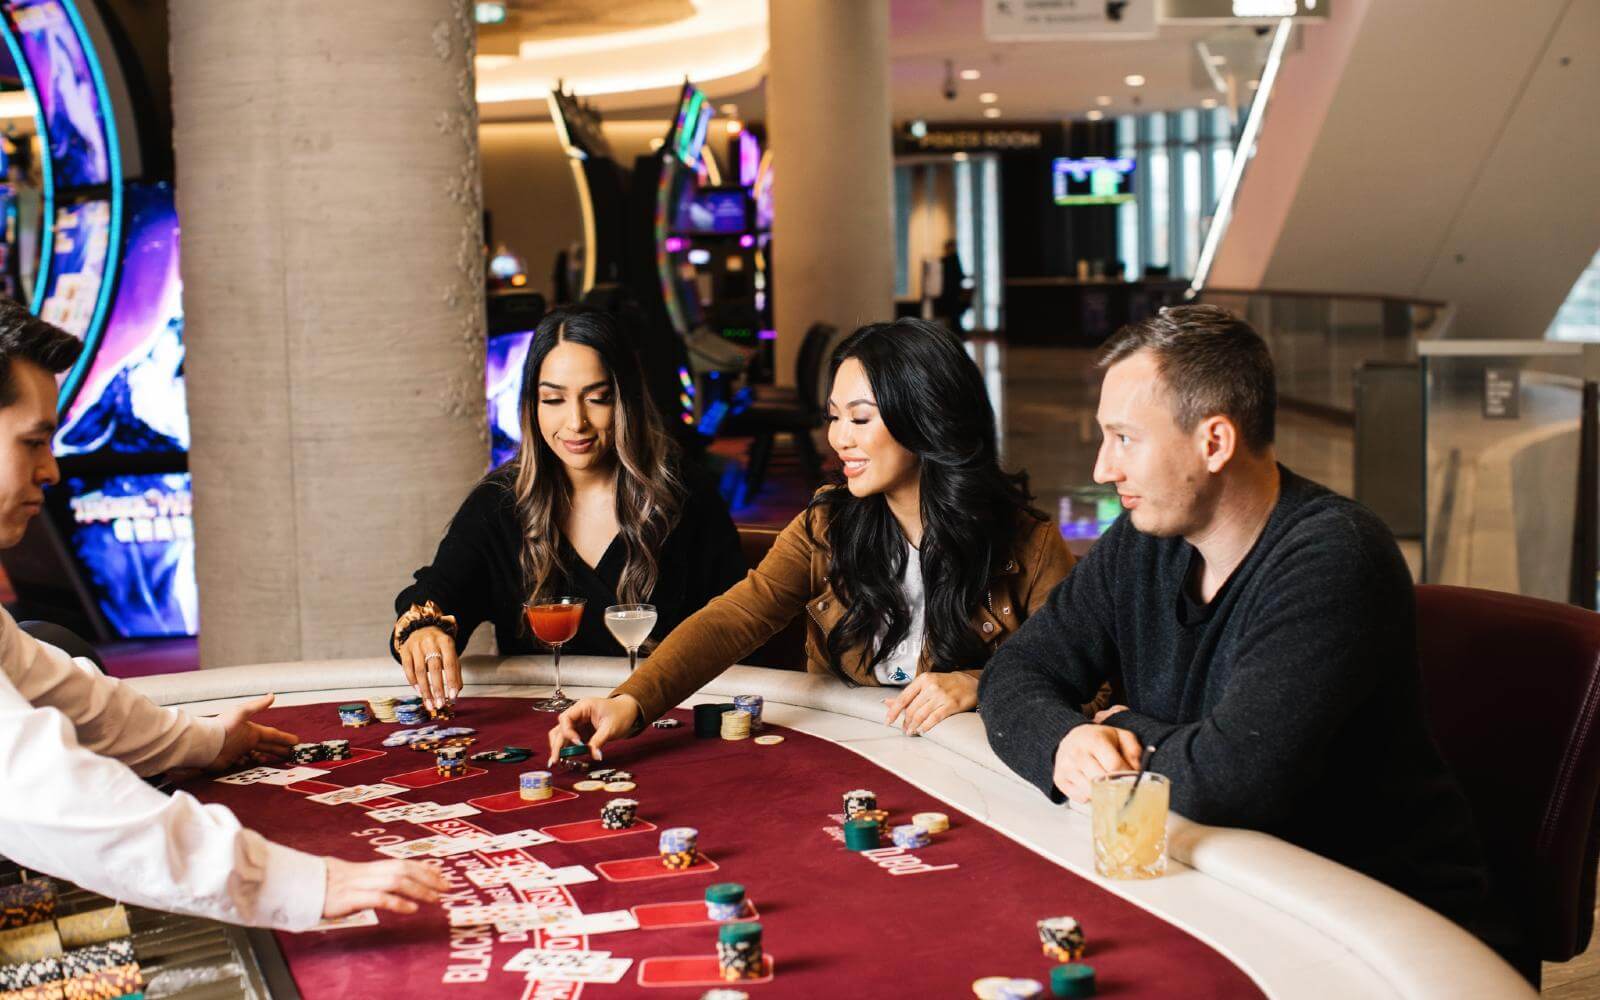 young people playing blackjack at parq casino in downtown vancouver bc canada